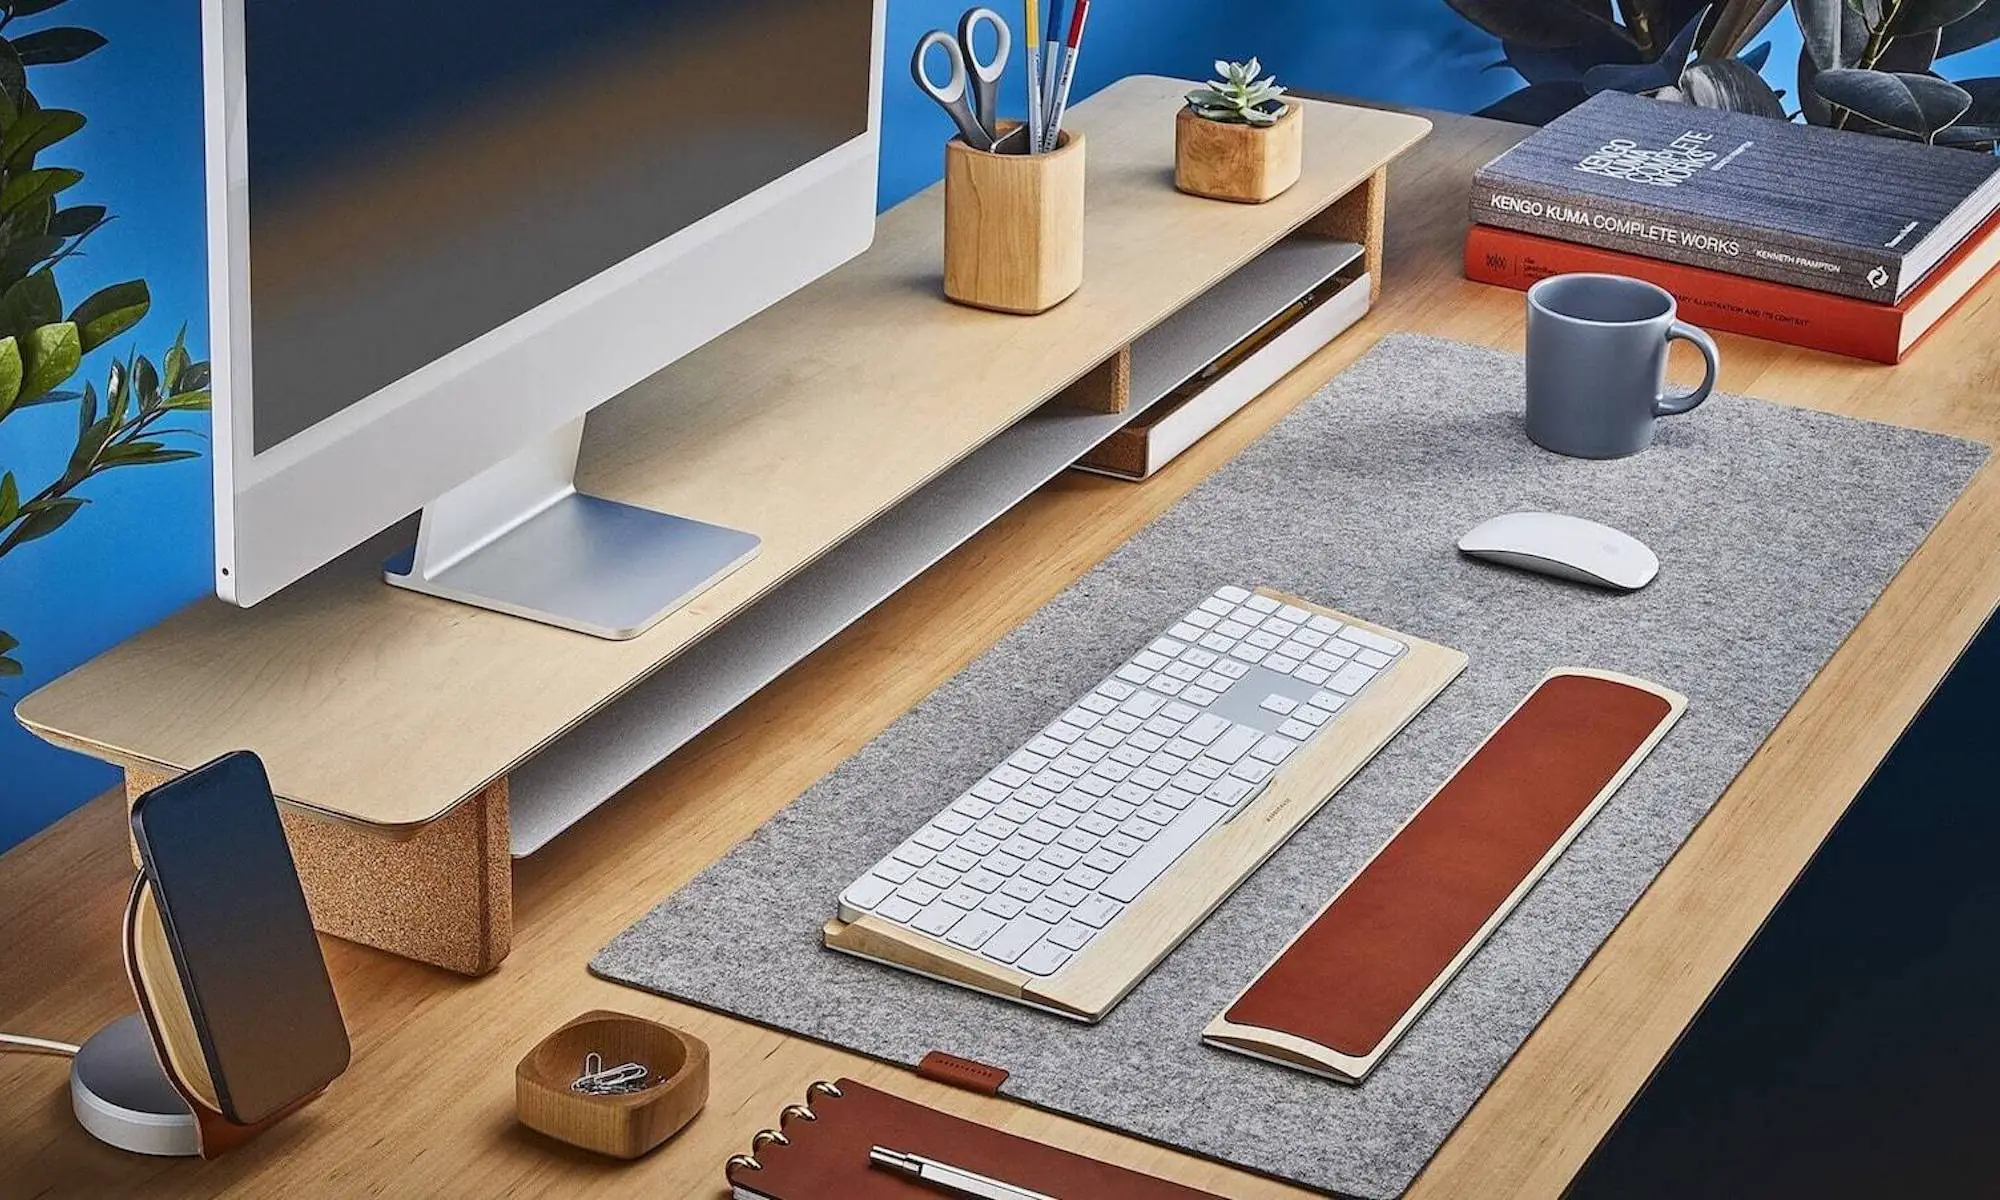 These storage gadgets and accessories help you tackle clutter in closets,  desk drawers & more